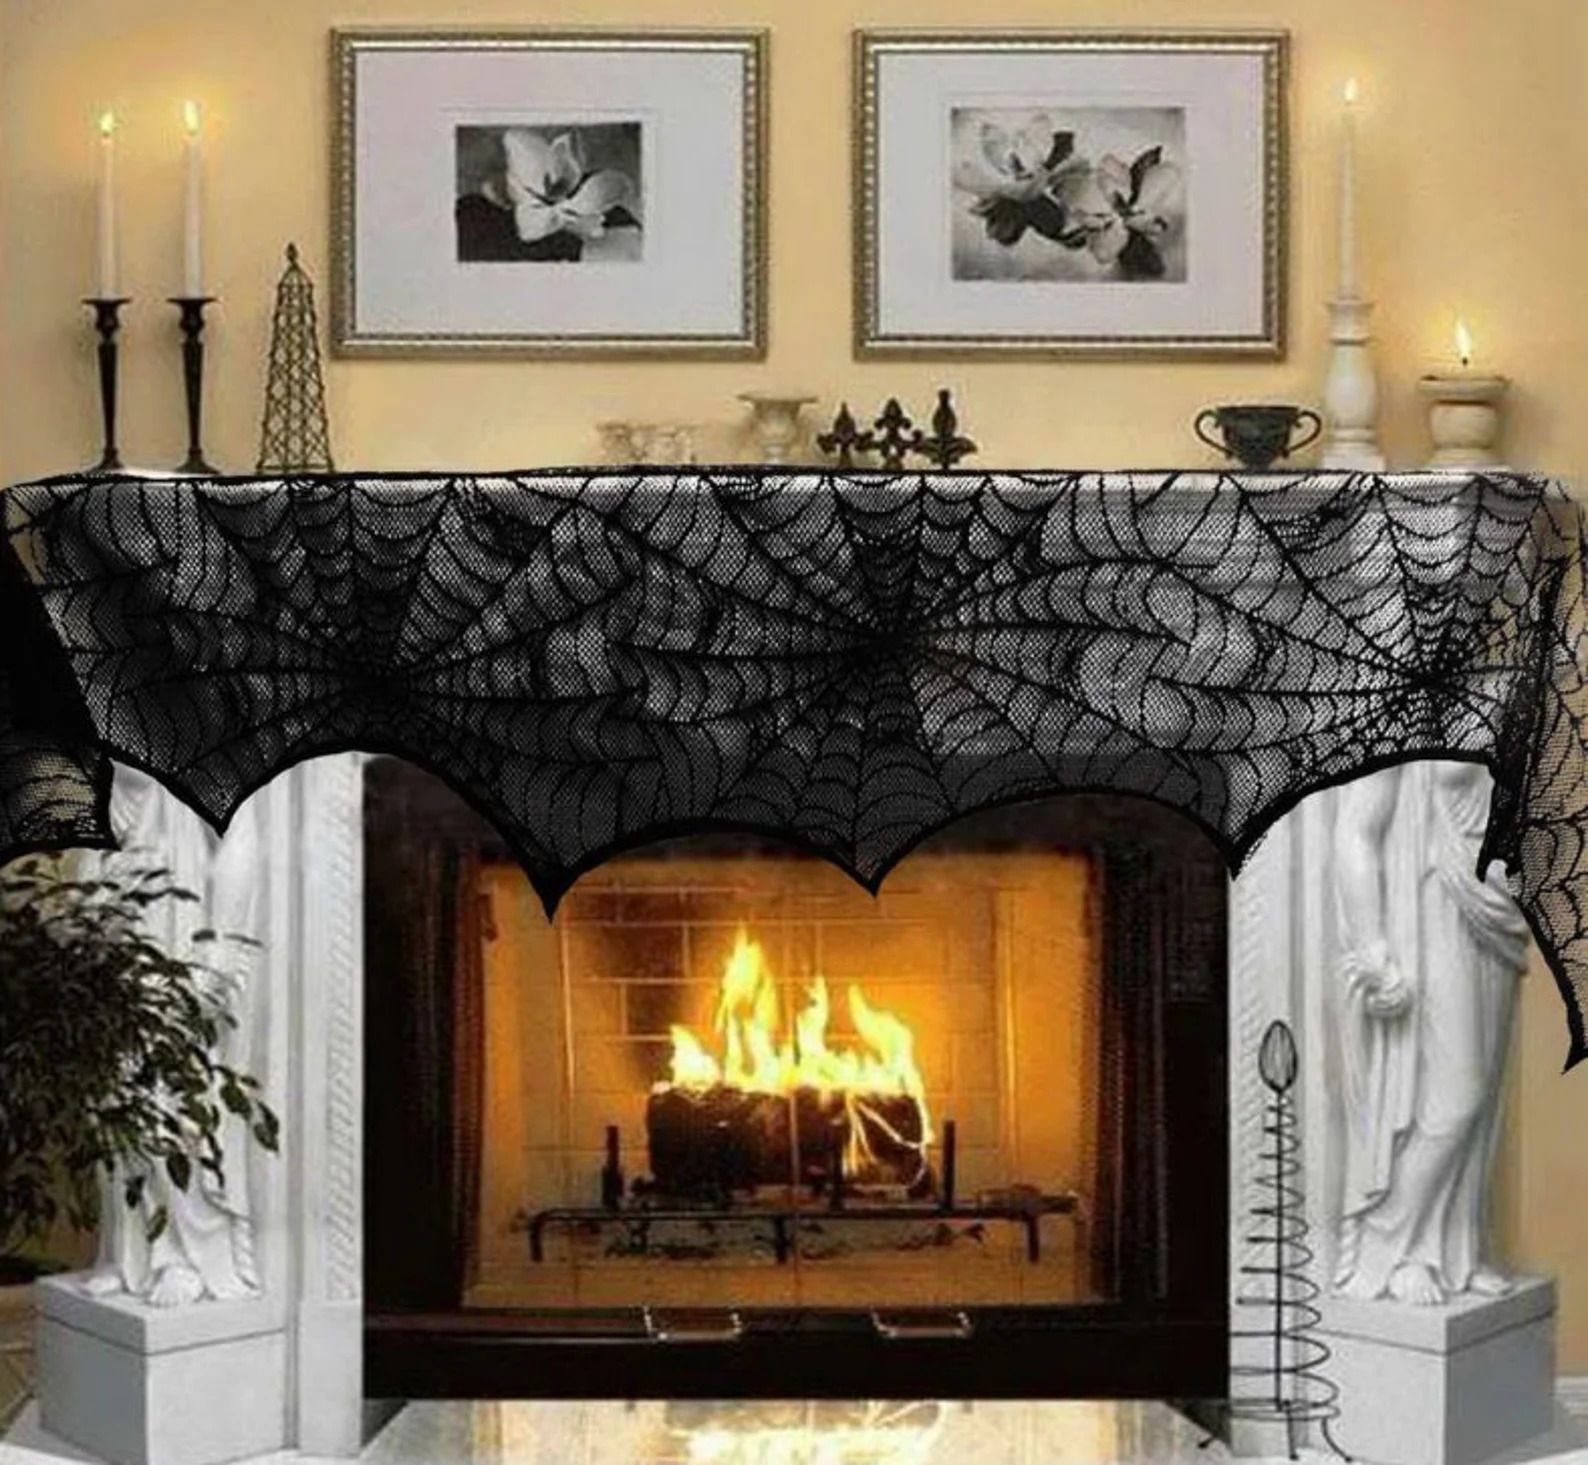 17 Spooky Halloween Decoration Designs You Should Check Out